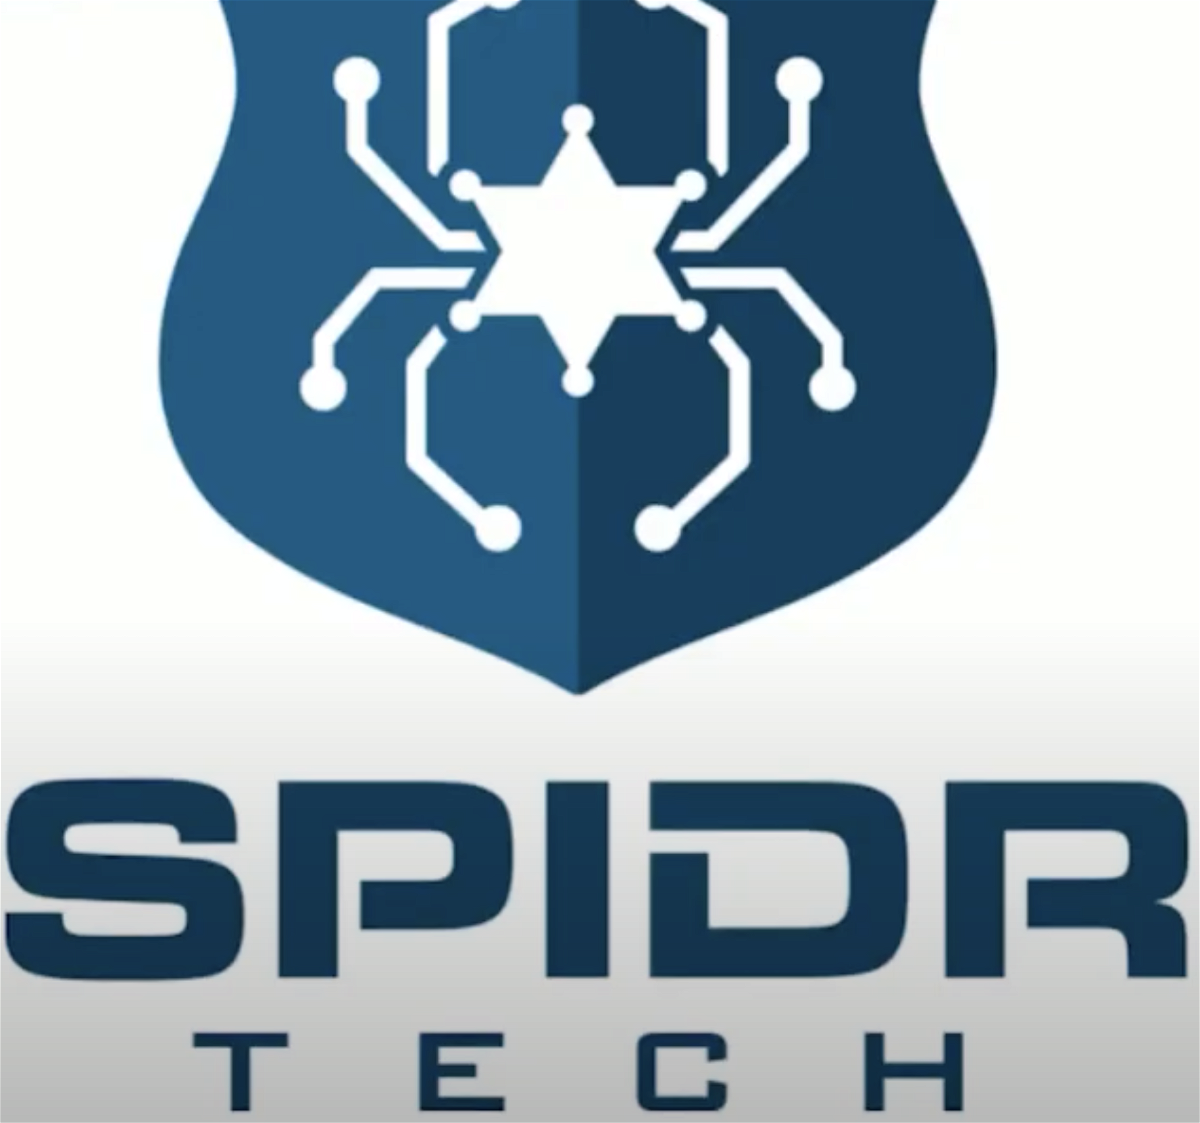 SPIDR Tech presents survey results, Bend Police get high results from the community